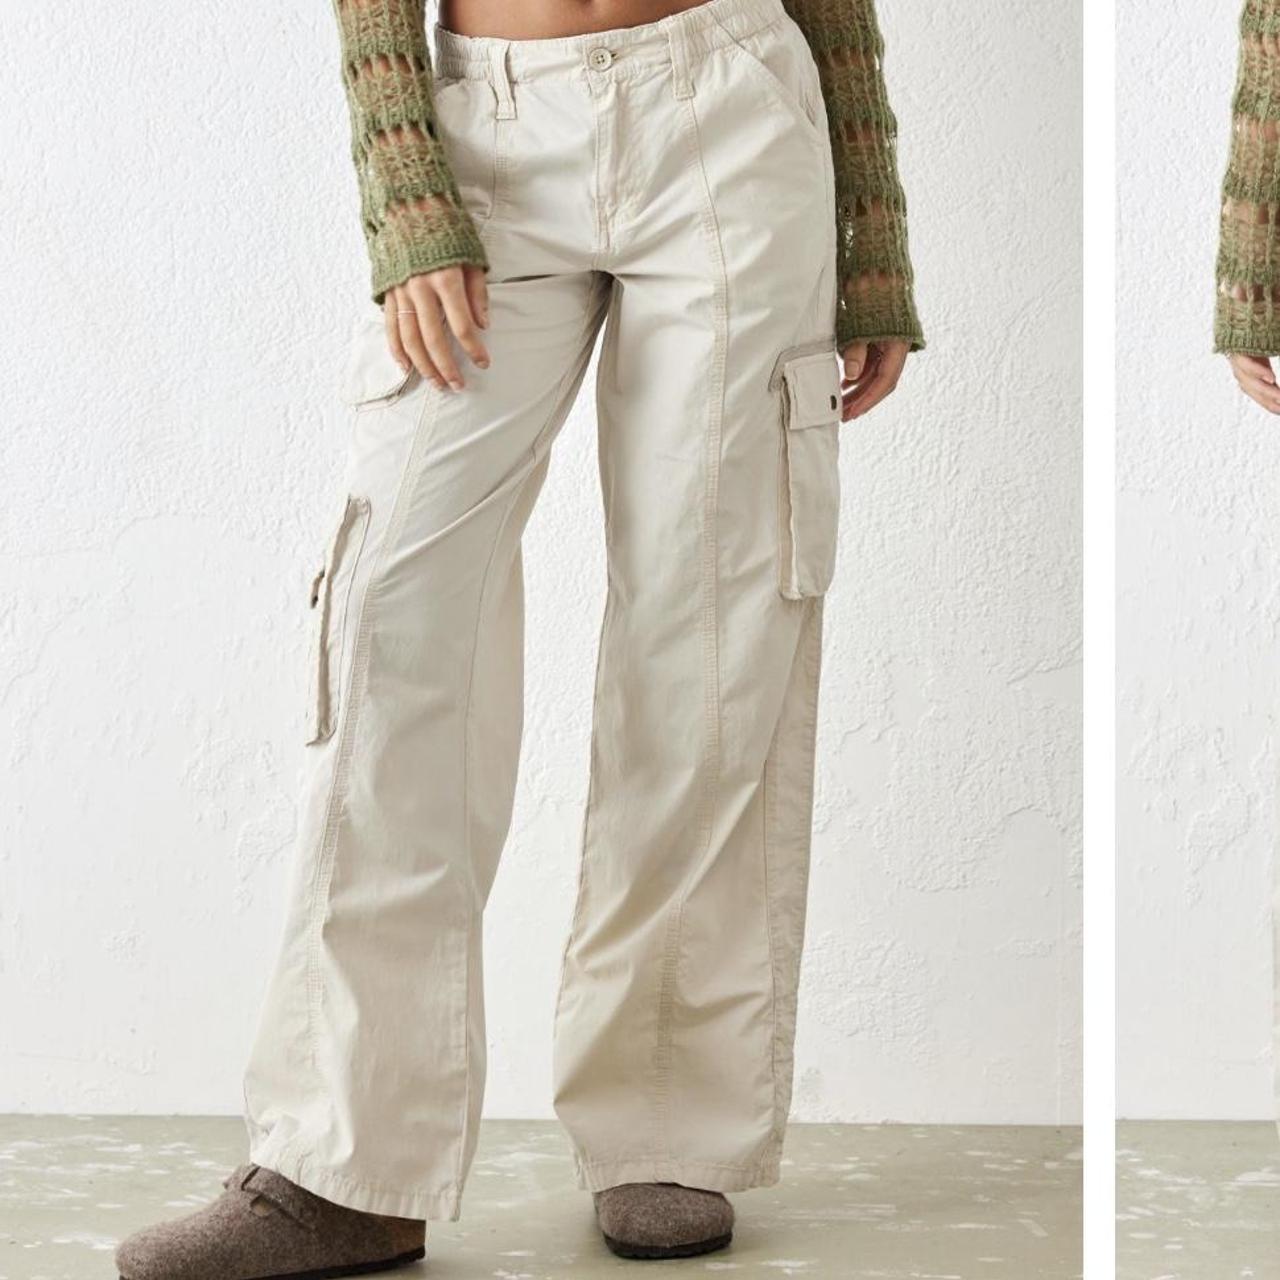 Urban Outfitters Cream Y2K Multi-Pocket Cargo Pants